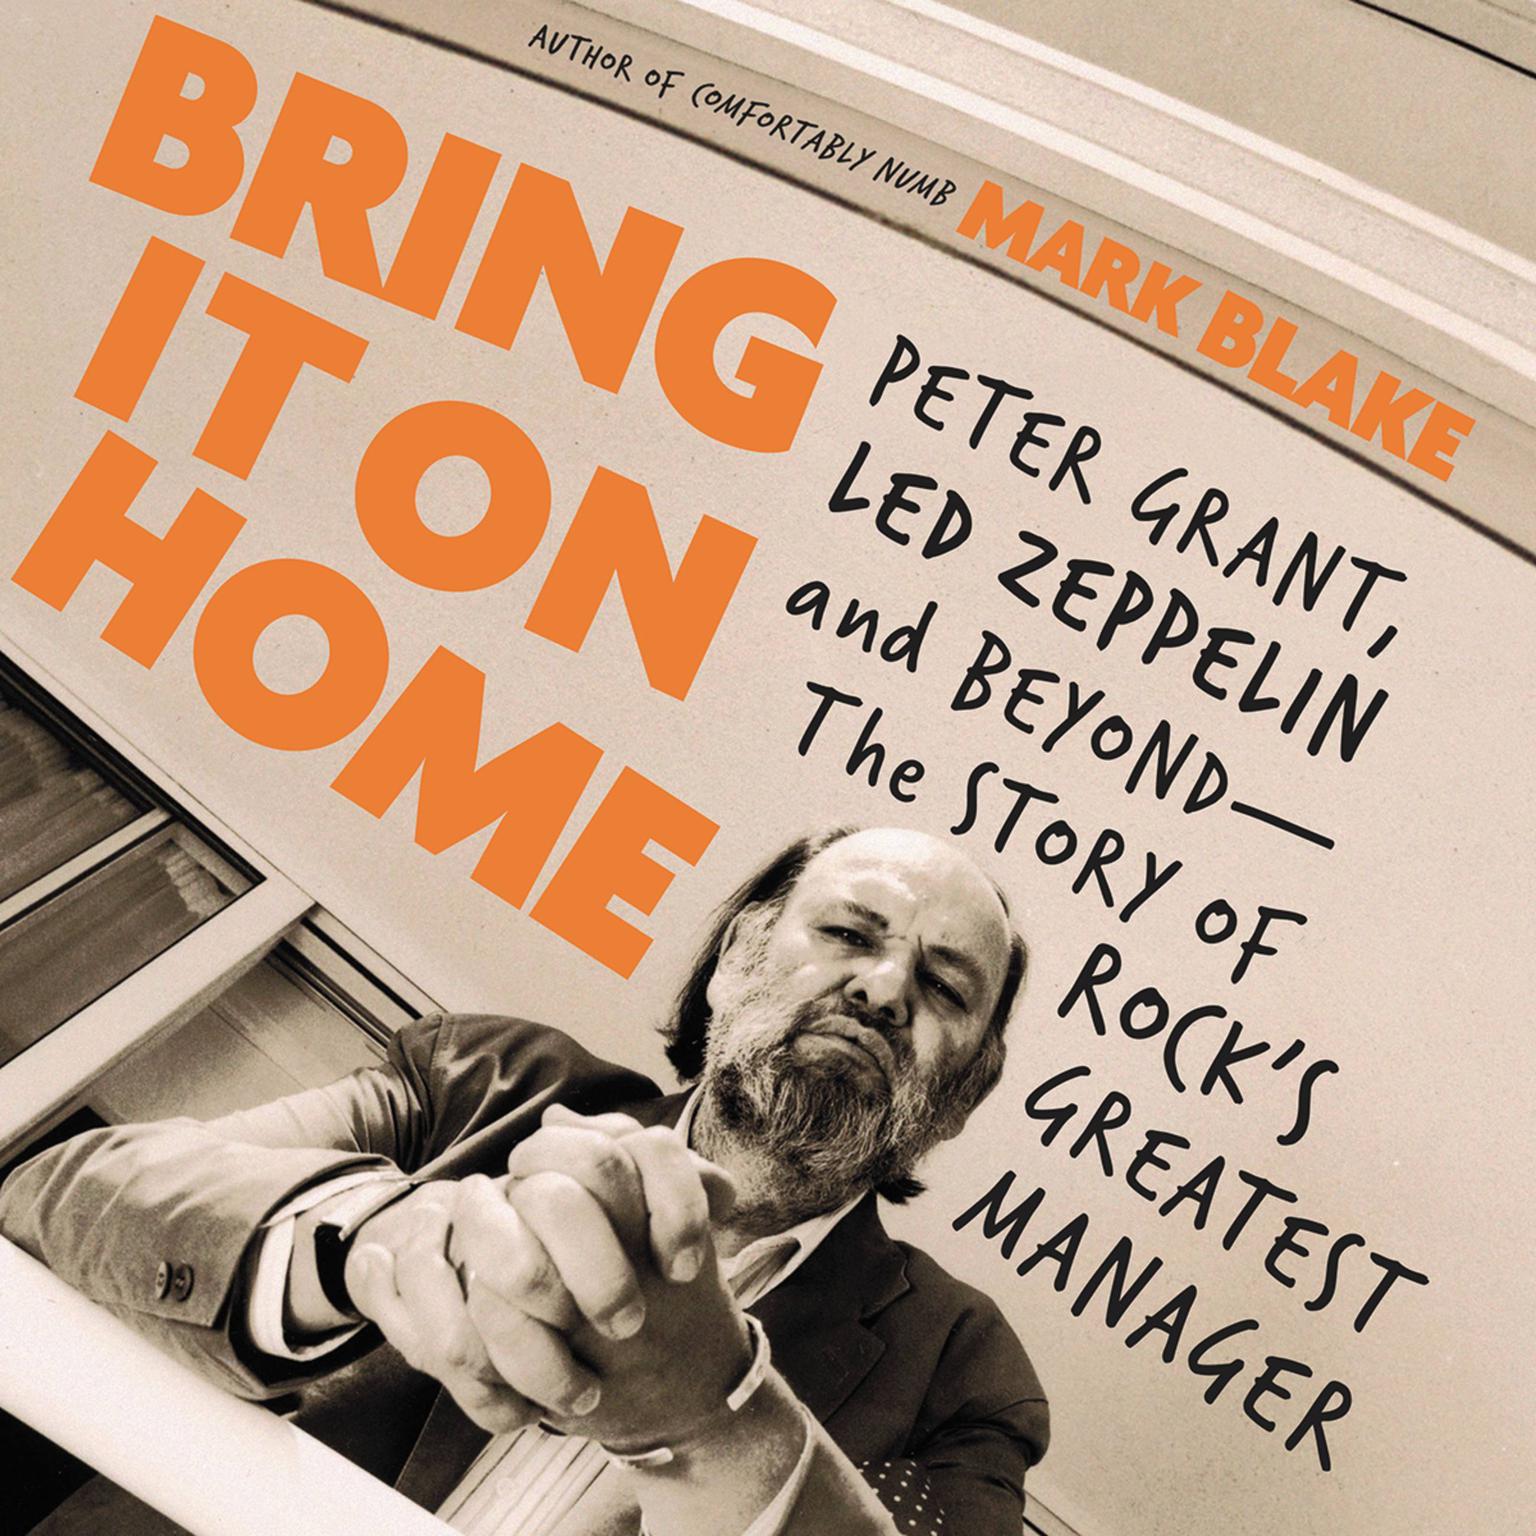 Bring It On Home: Peter Grant, Led Zeppelin, and Beyond -- The Story of Rocks Greatest Manager Audiobook, by Mark Blake